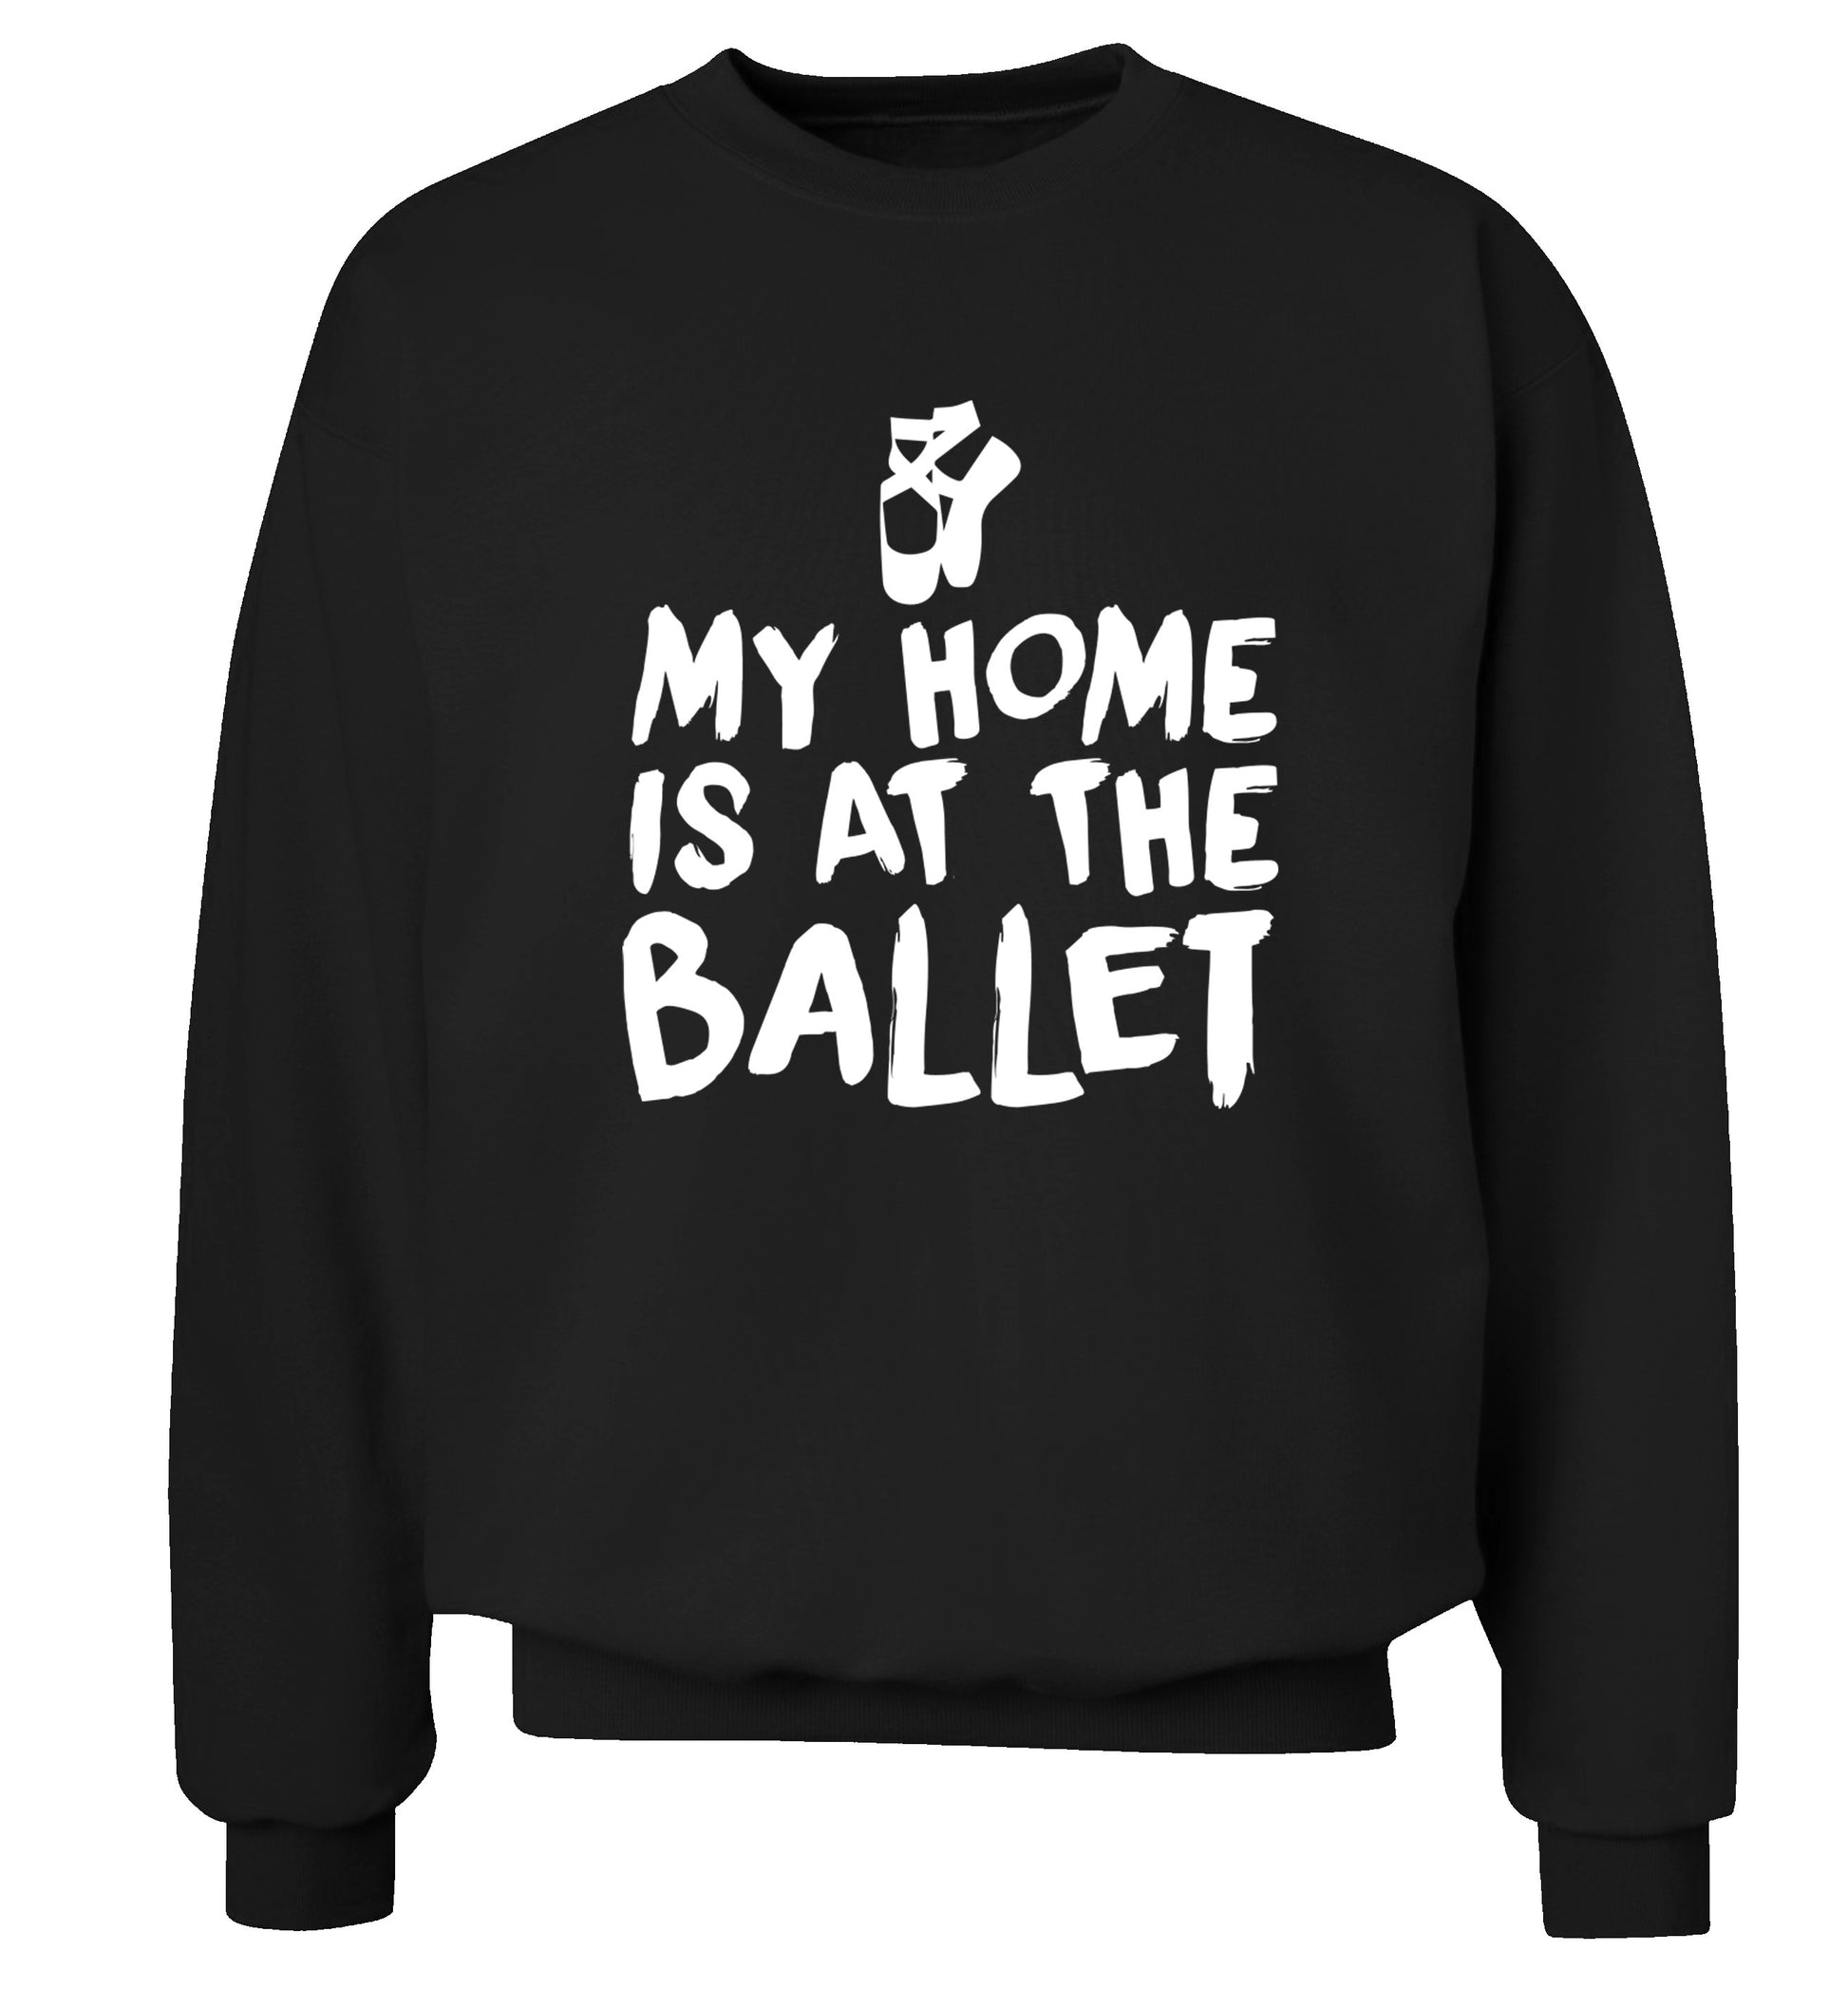 My home is at the ballet Adult's unisex black Sweater 2XL